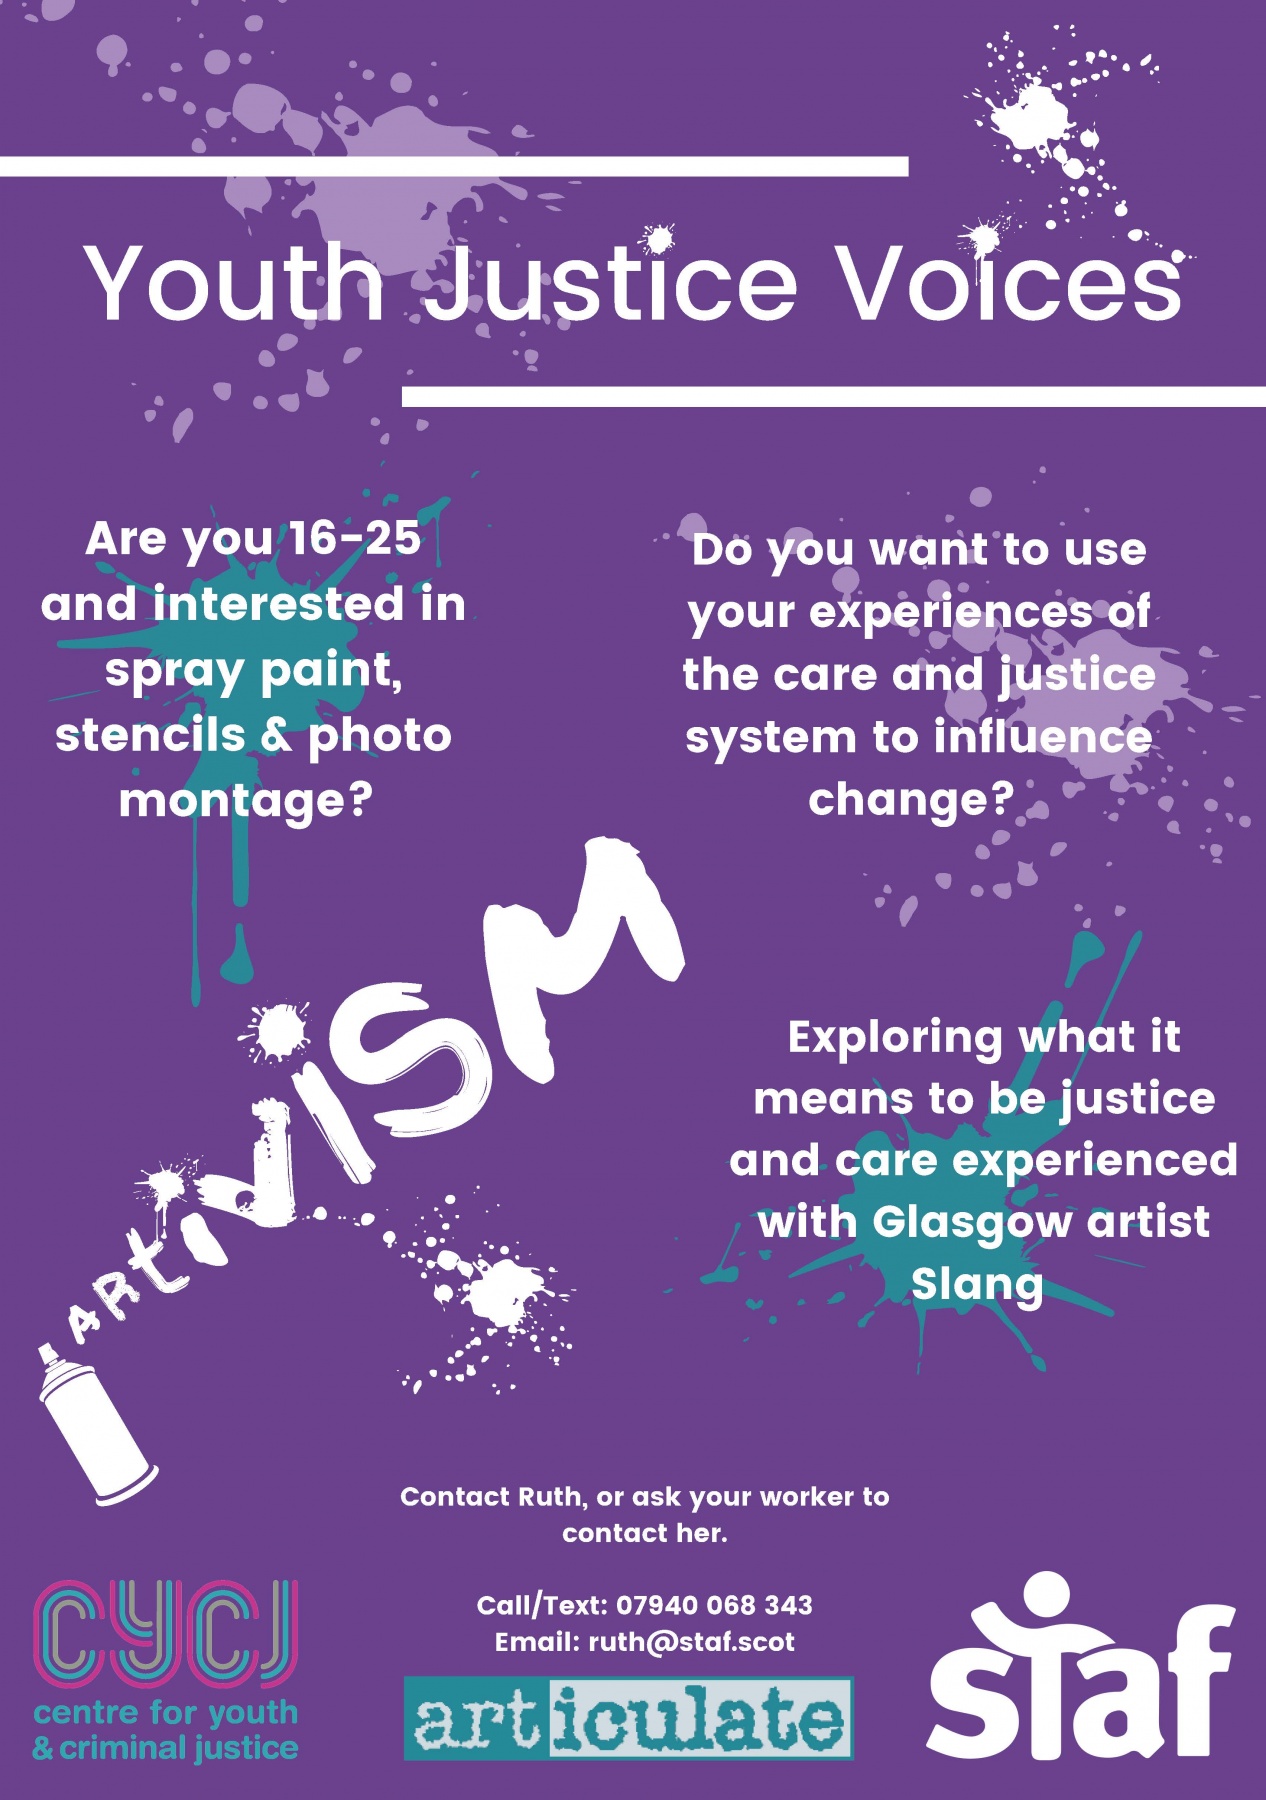 Youth Justice Voices joins forces with Articulate Children and Young